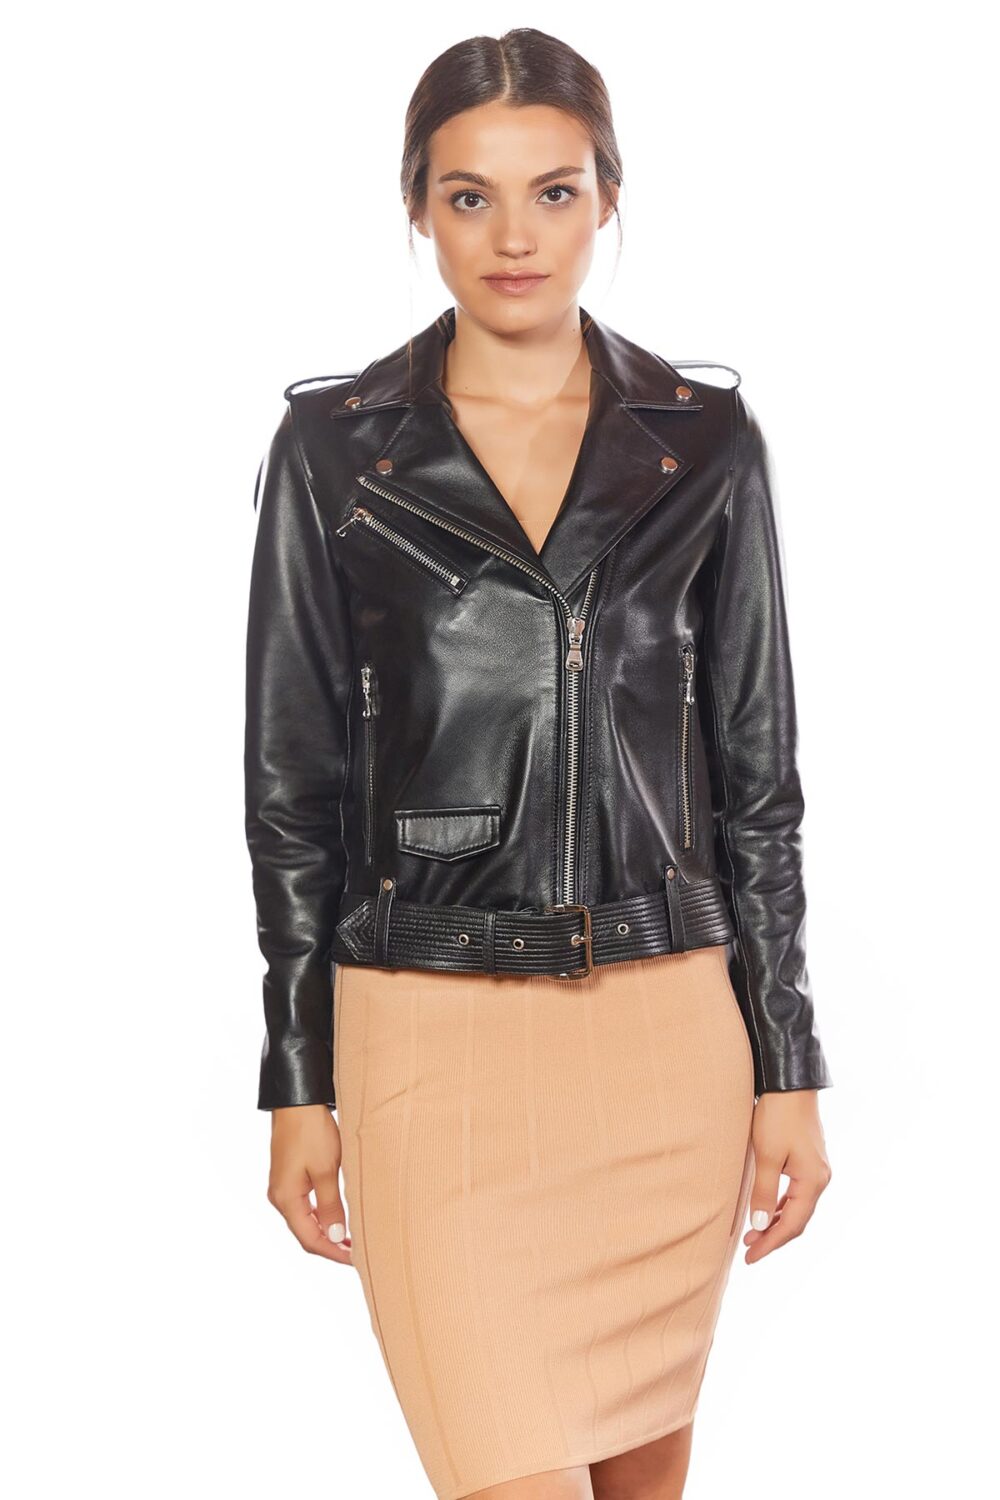 Embroidered Black Leather Vests - Real Leather Jackets Women